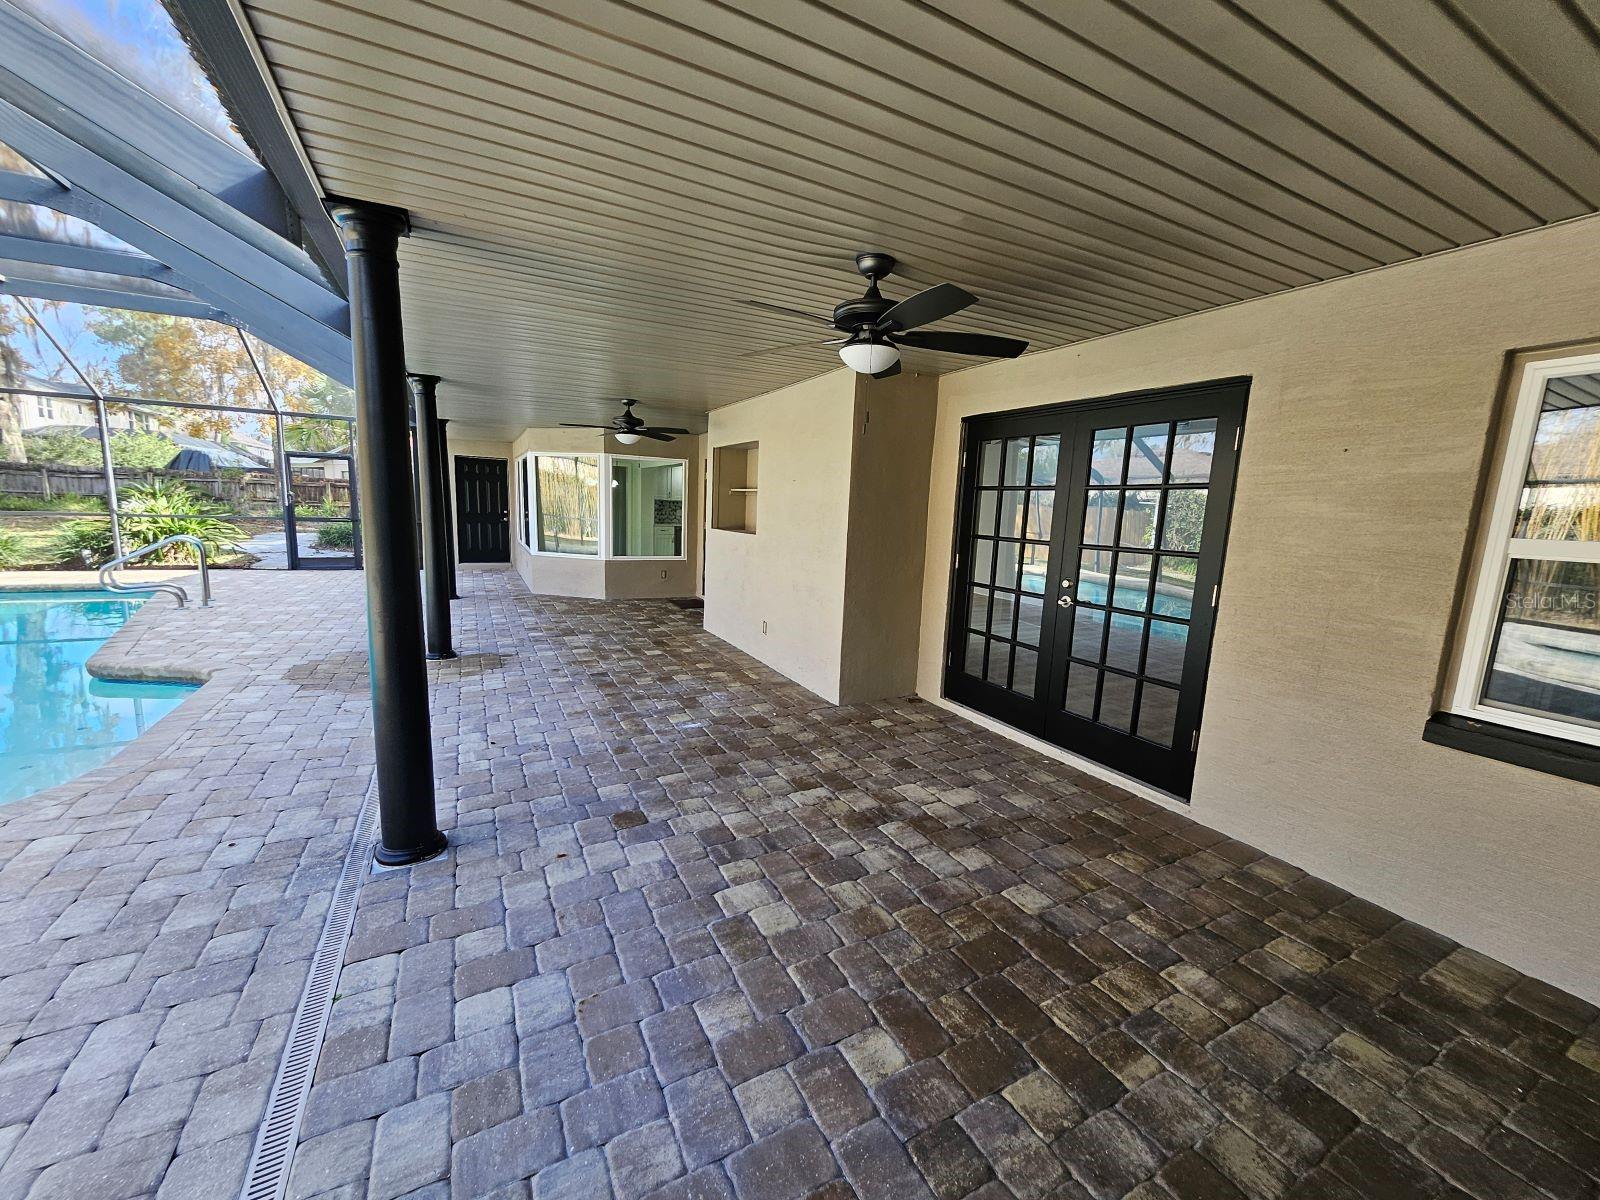 access from mudroom, Great Room and Master Suite to Lanai